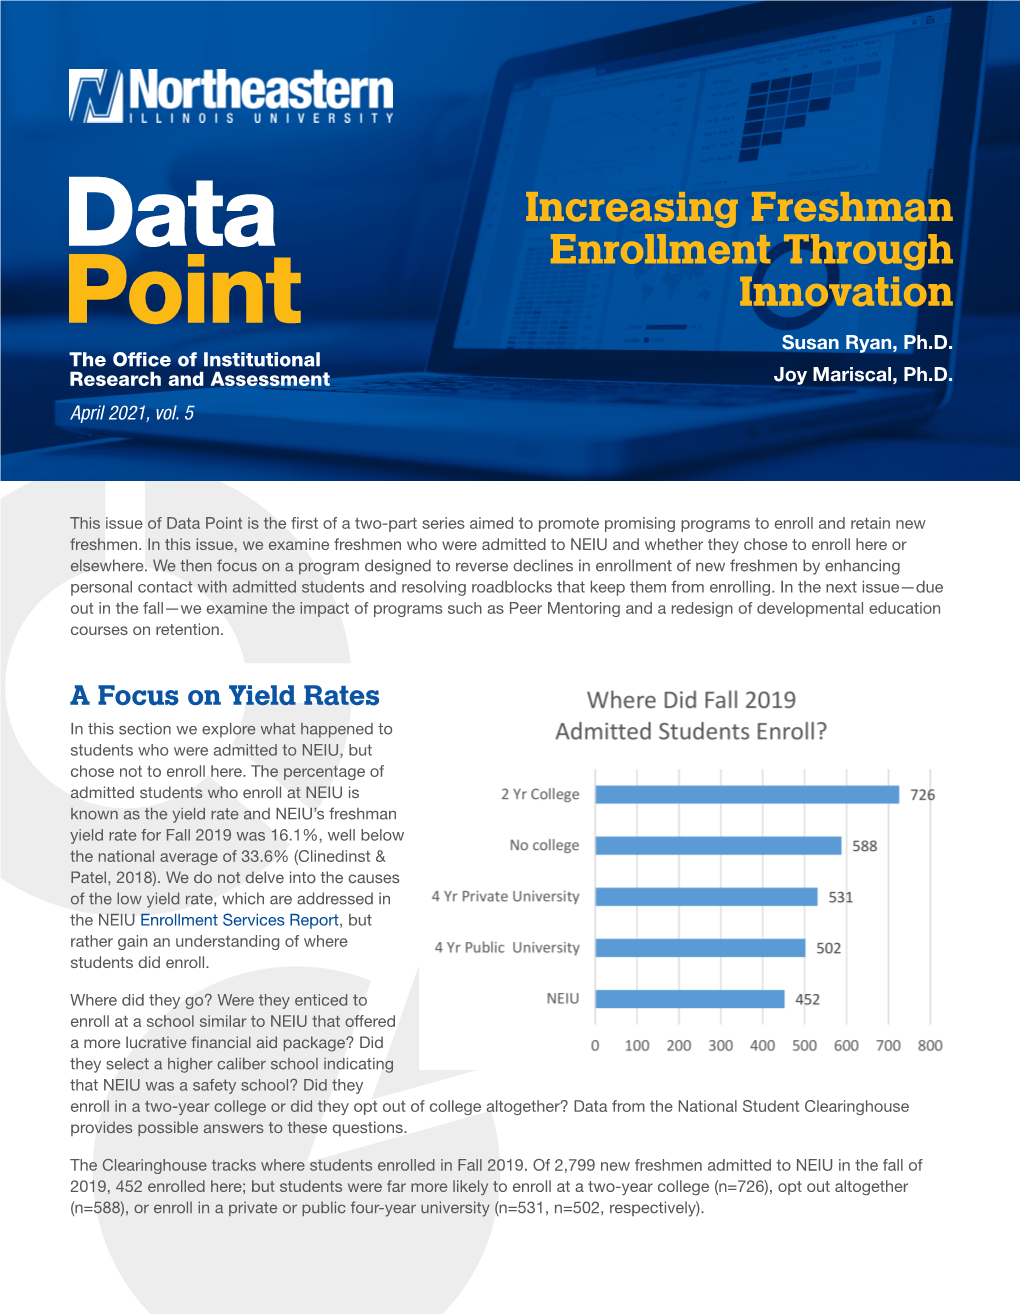 Data Point Read the Latest Institutional Research Publication